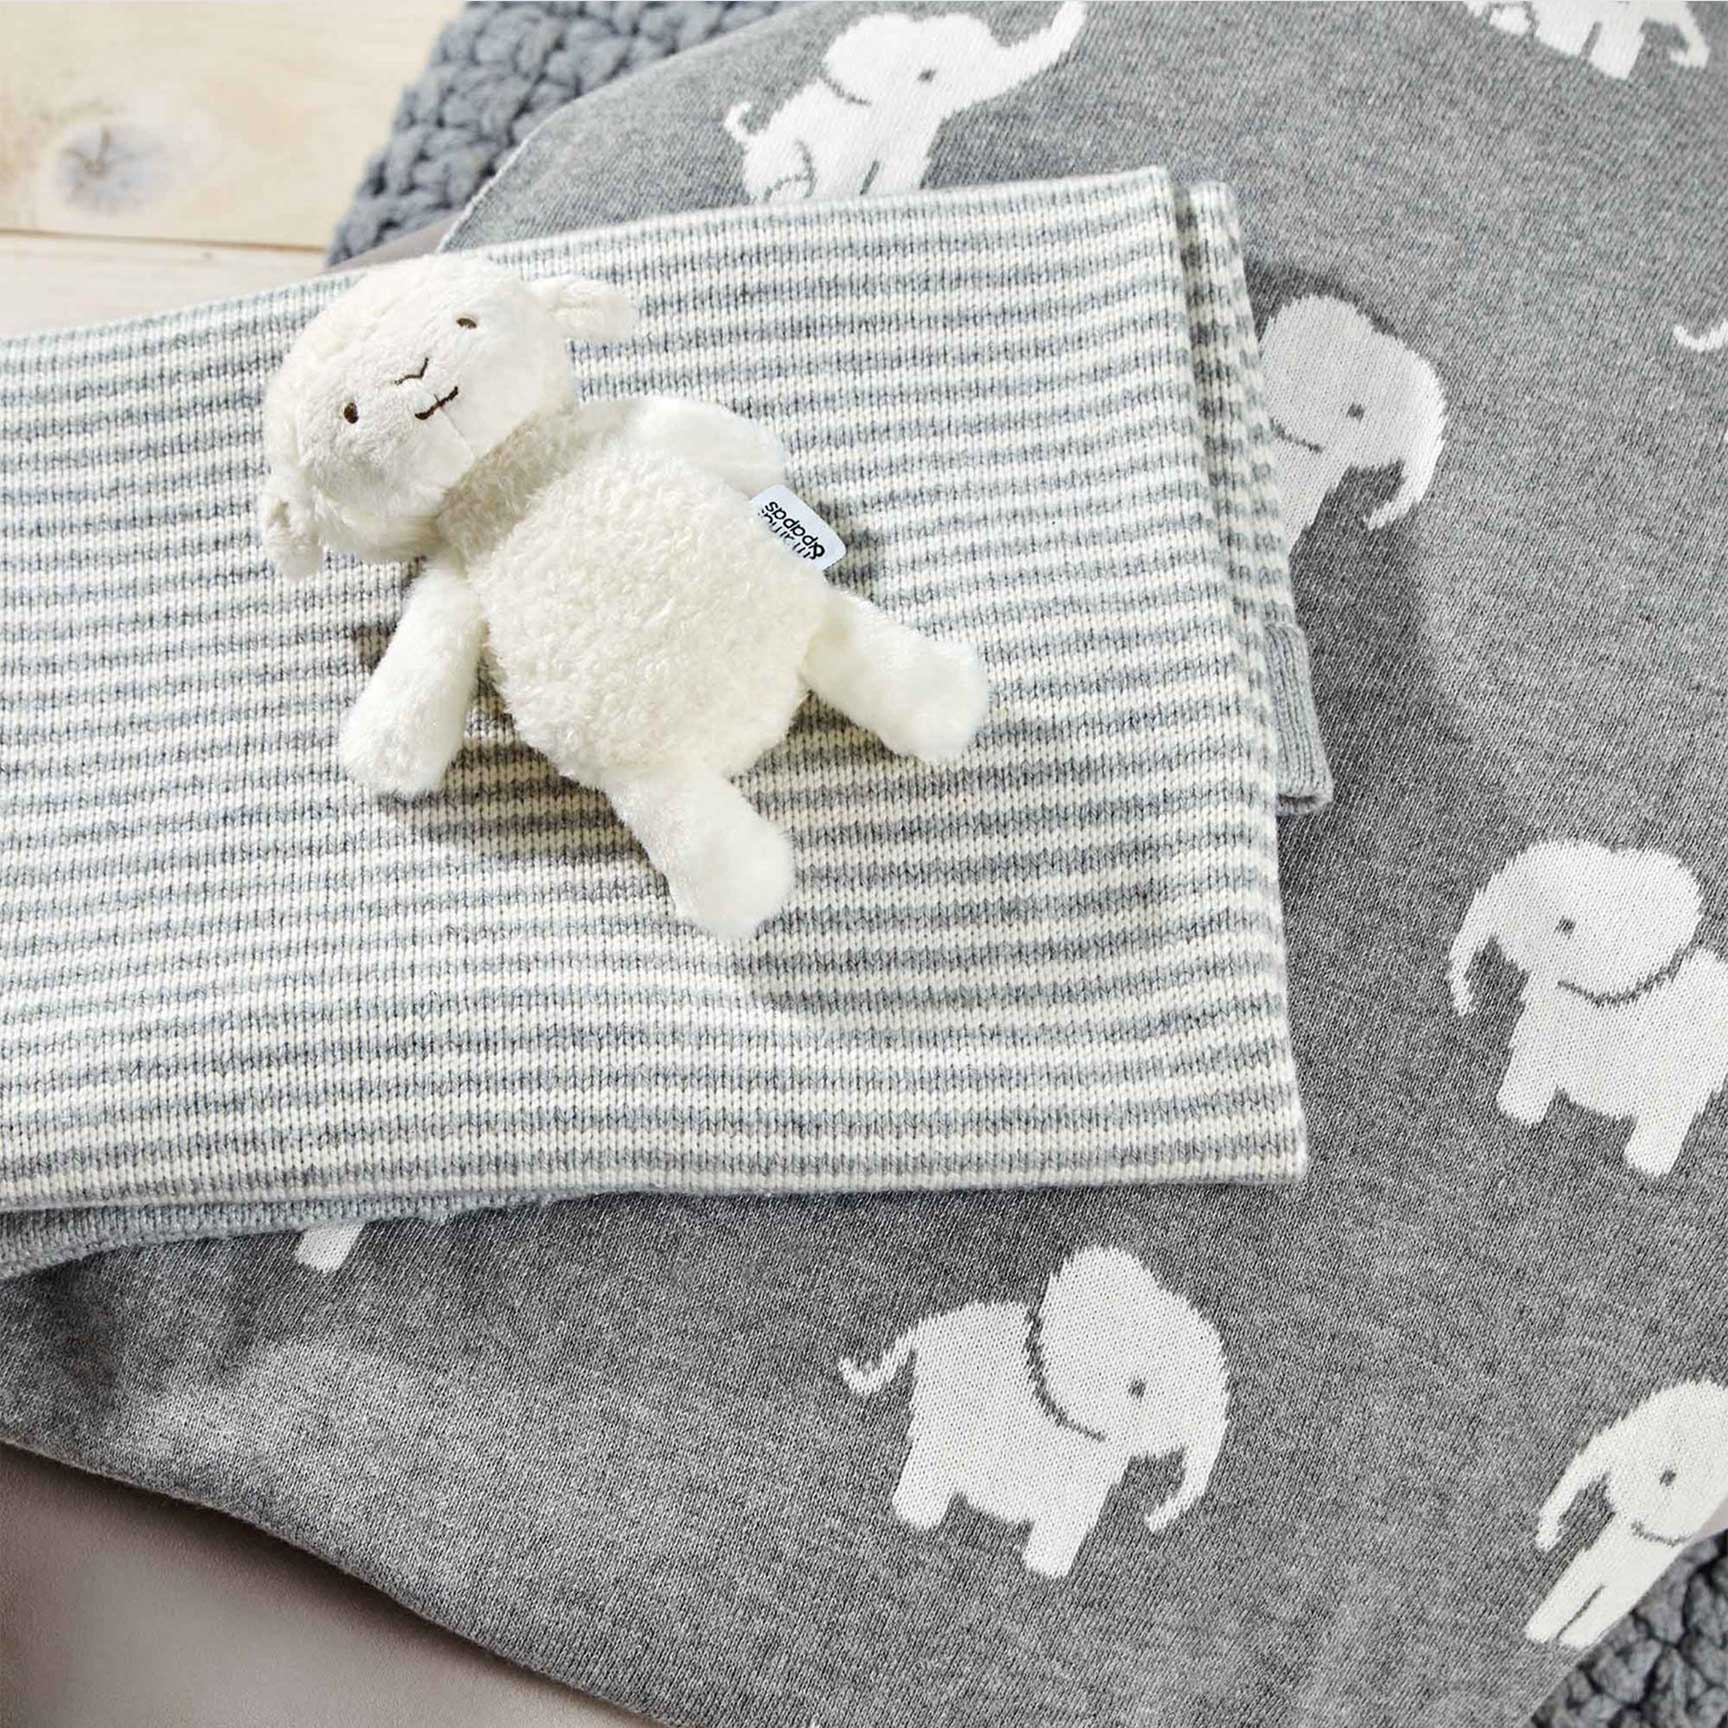 Mamas & Papas Cot & Cot Bed Blankets Mamas & Papas Welcome To The World Knitted Elephant Blanket - Grey